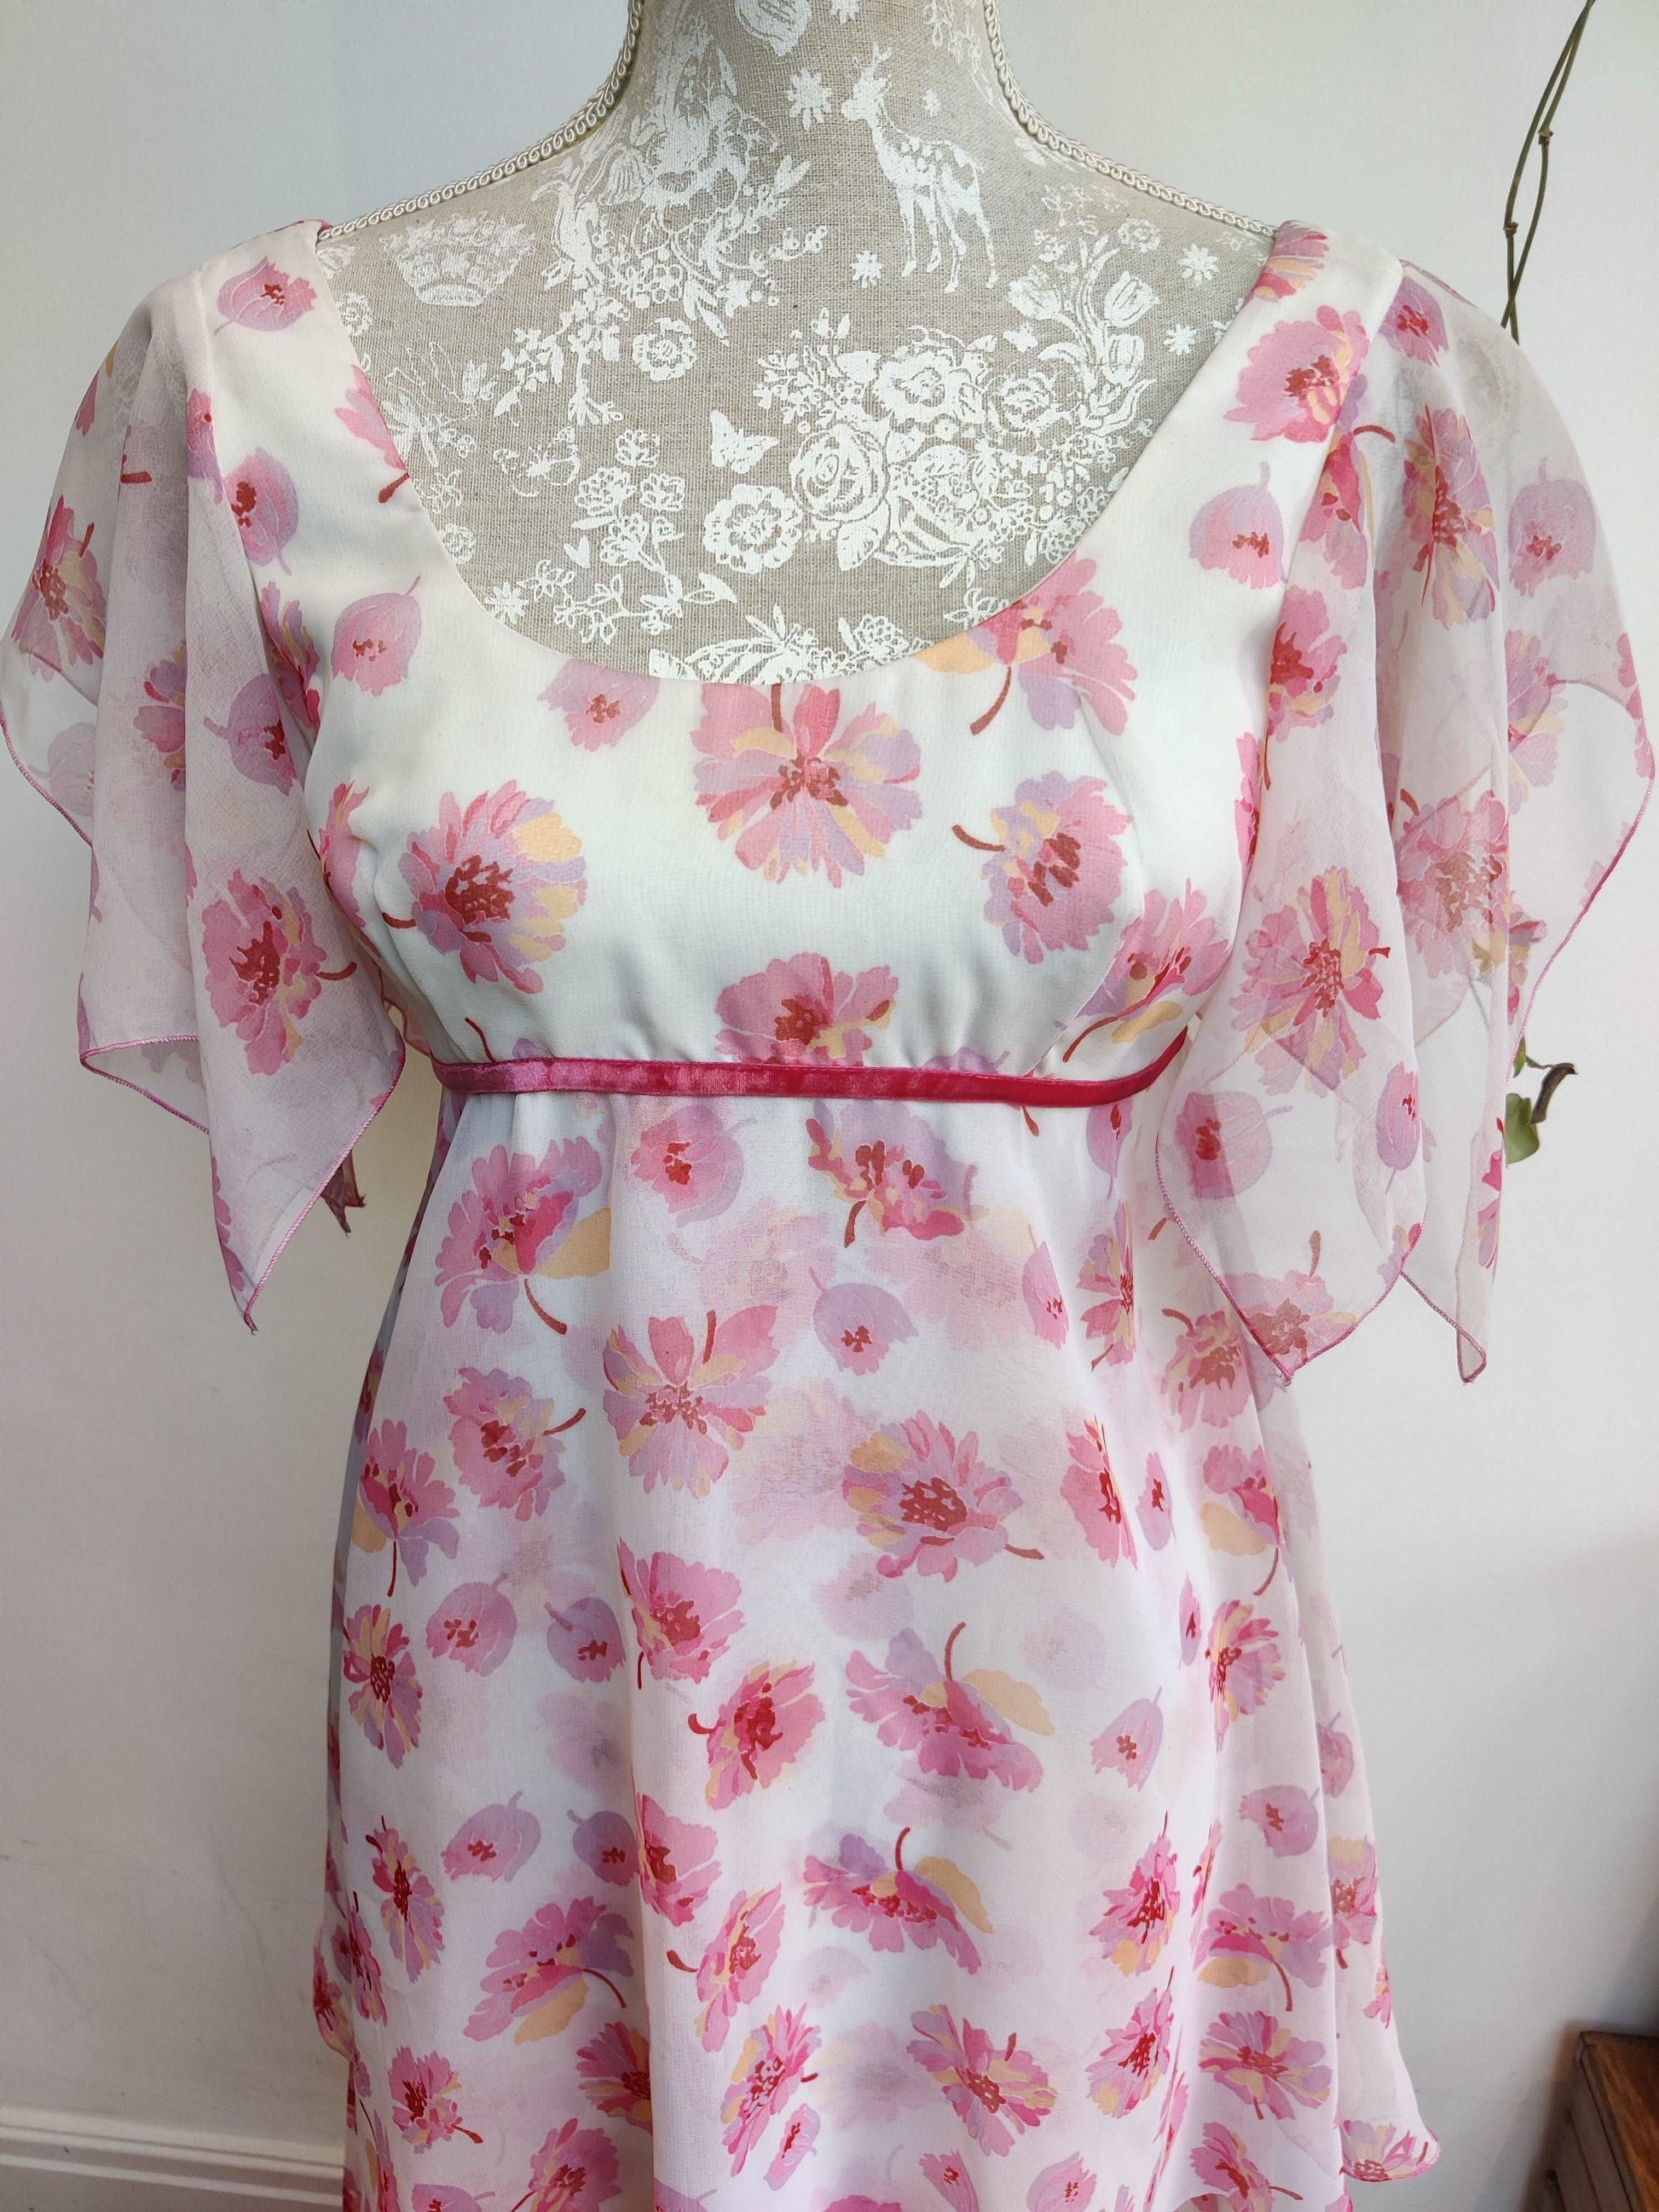 Beautiful floral maxi dress, perfect for weddings. Size 10.